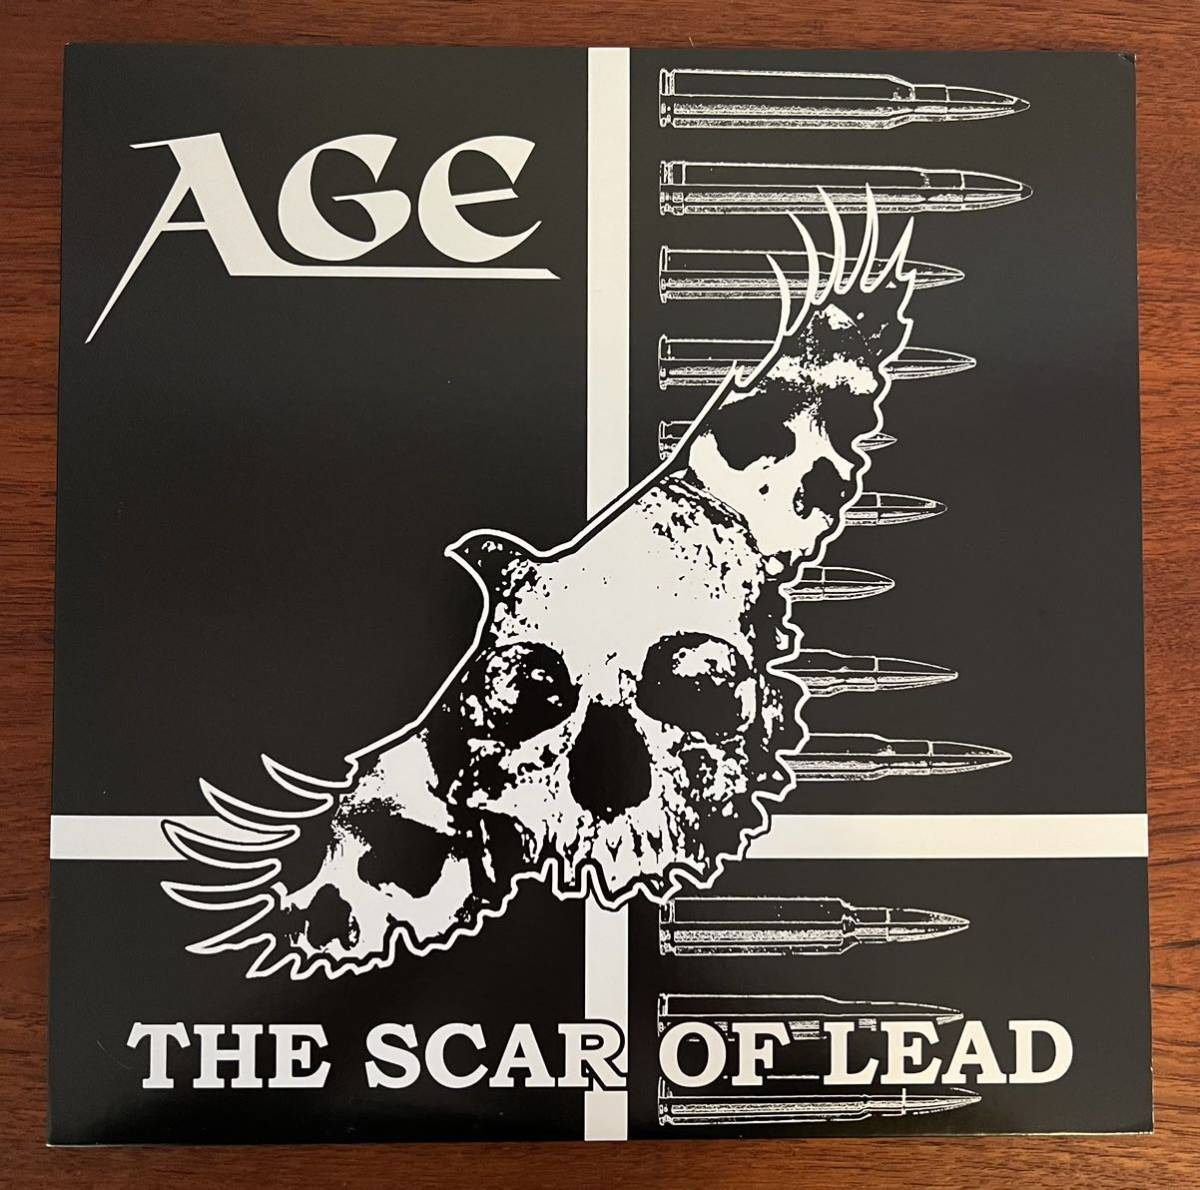 AGE The Scar Of Lead EP Armed Government\'s Error hakuchi Gism life SDS disclose hellbastard bolt thrower amebix deviated instinct